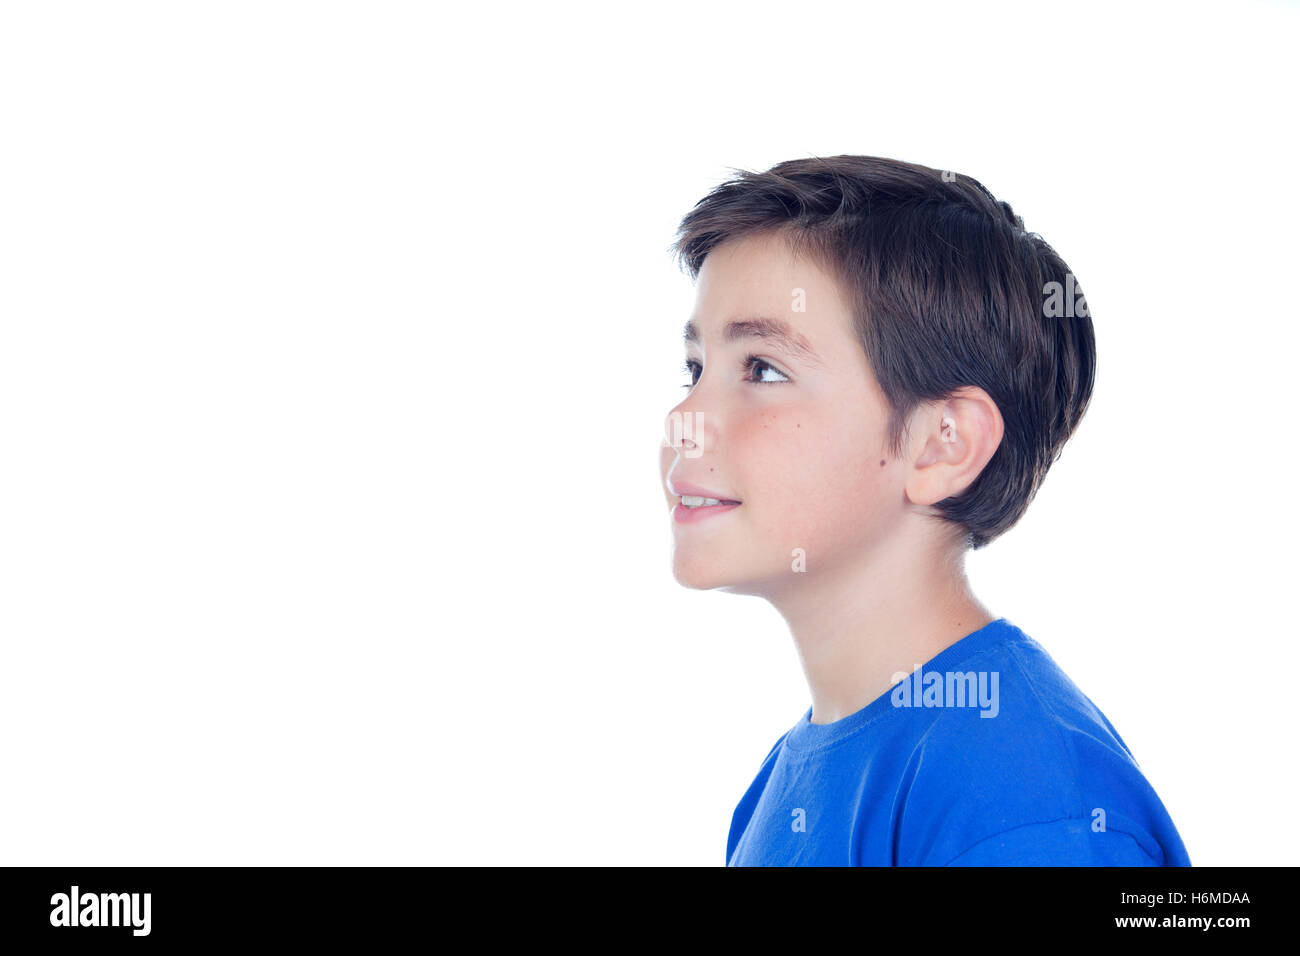 Funny child with ten years old and blue t-shirt isolated on a white background Stock Photo